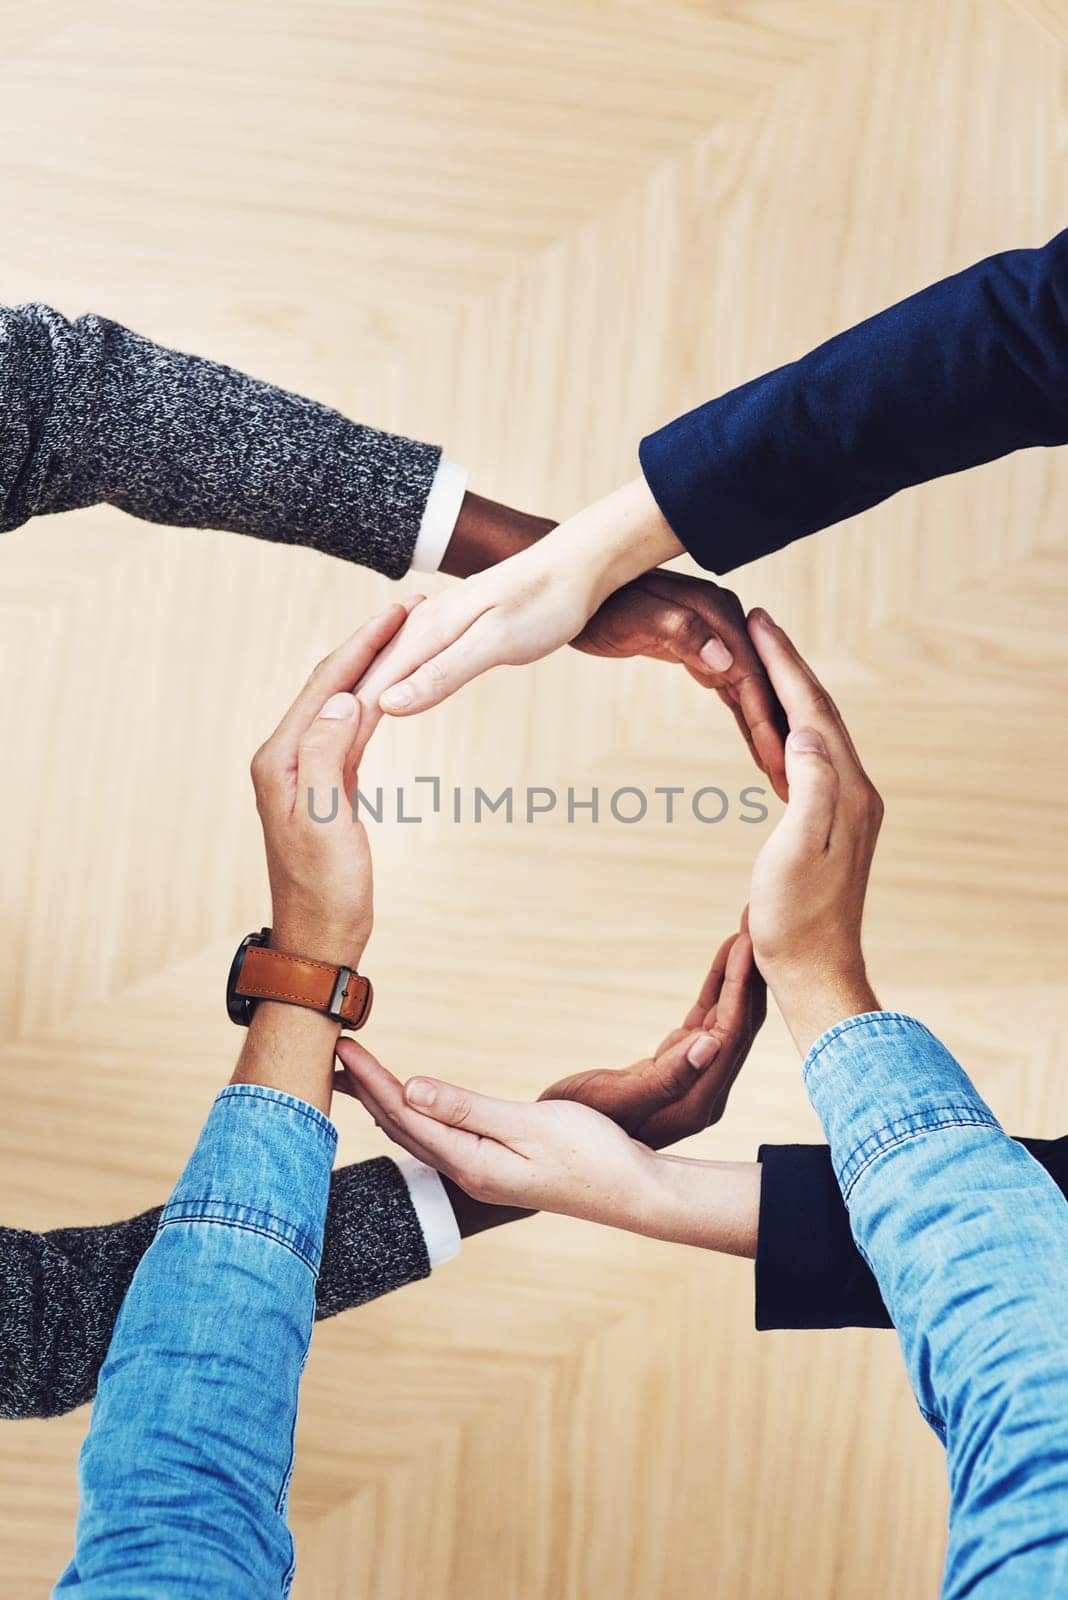 Above, recycling or hands of business people in circle for motivation, support or sustainability in office. Teamwork, recycle or employees for sustainable goals, community help or partnership group by YuriArcurs